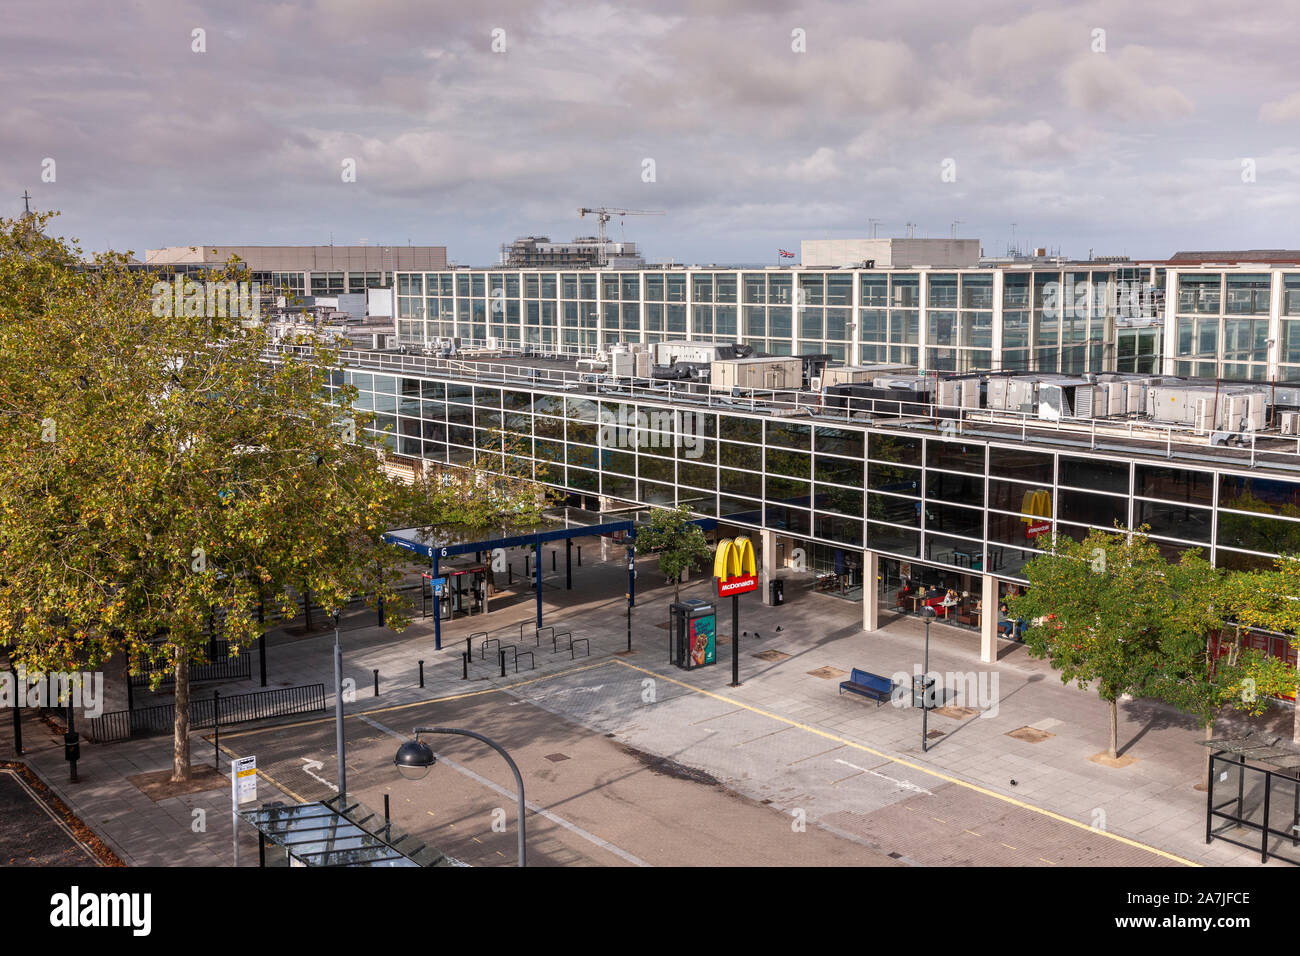 Central Milton Keynes shopping from a high viewpoint looking at the exteria, Buckinghamshire, England, Stock Photo